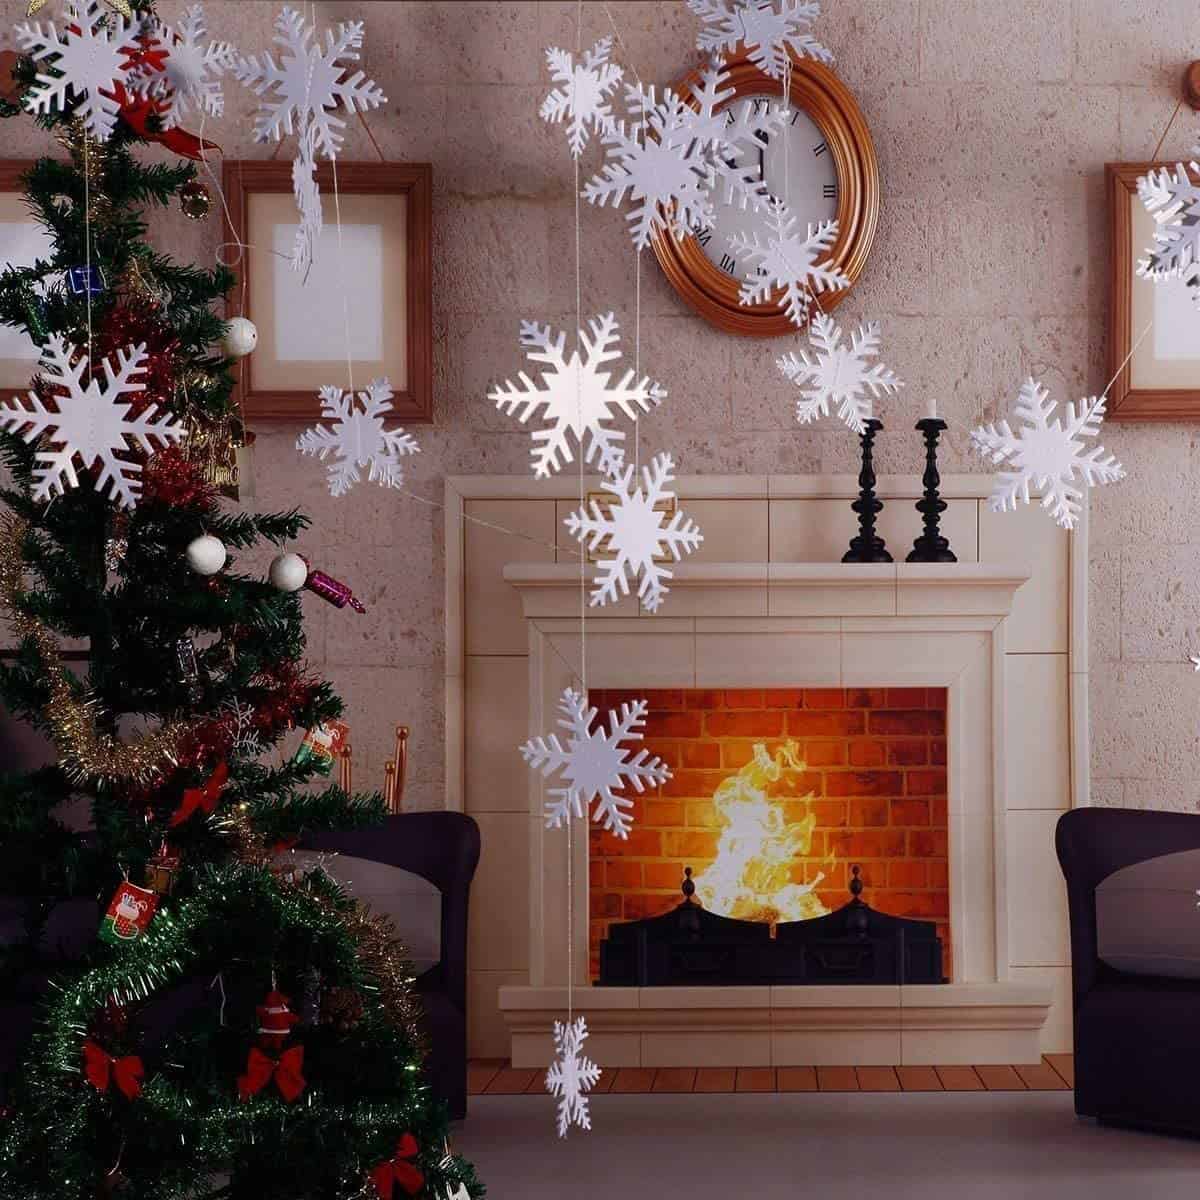 Graceful Christmas decoration idea with paper snowflakes as decor items for your tree and home